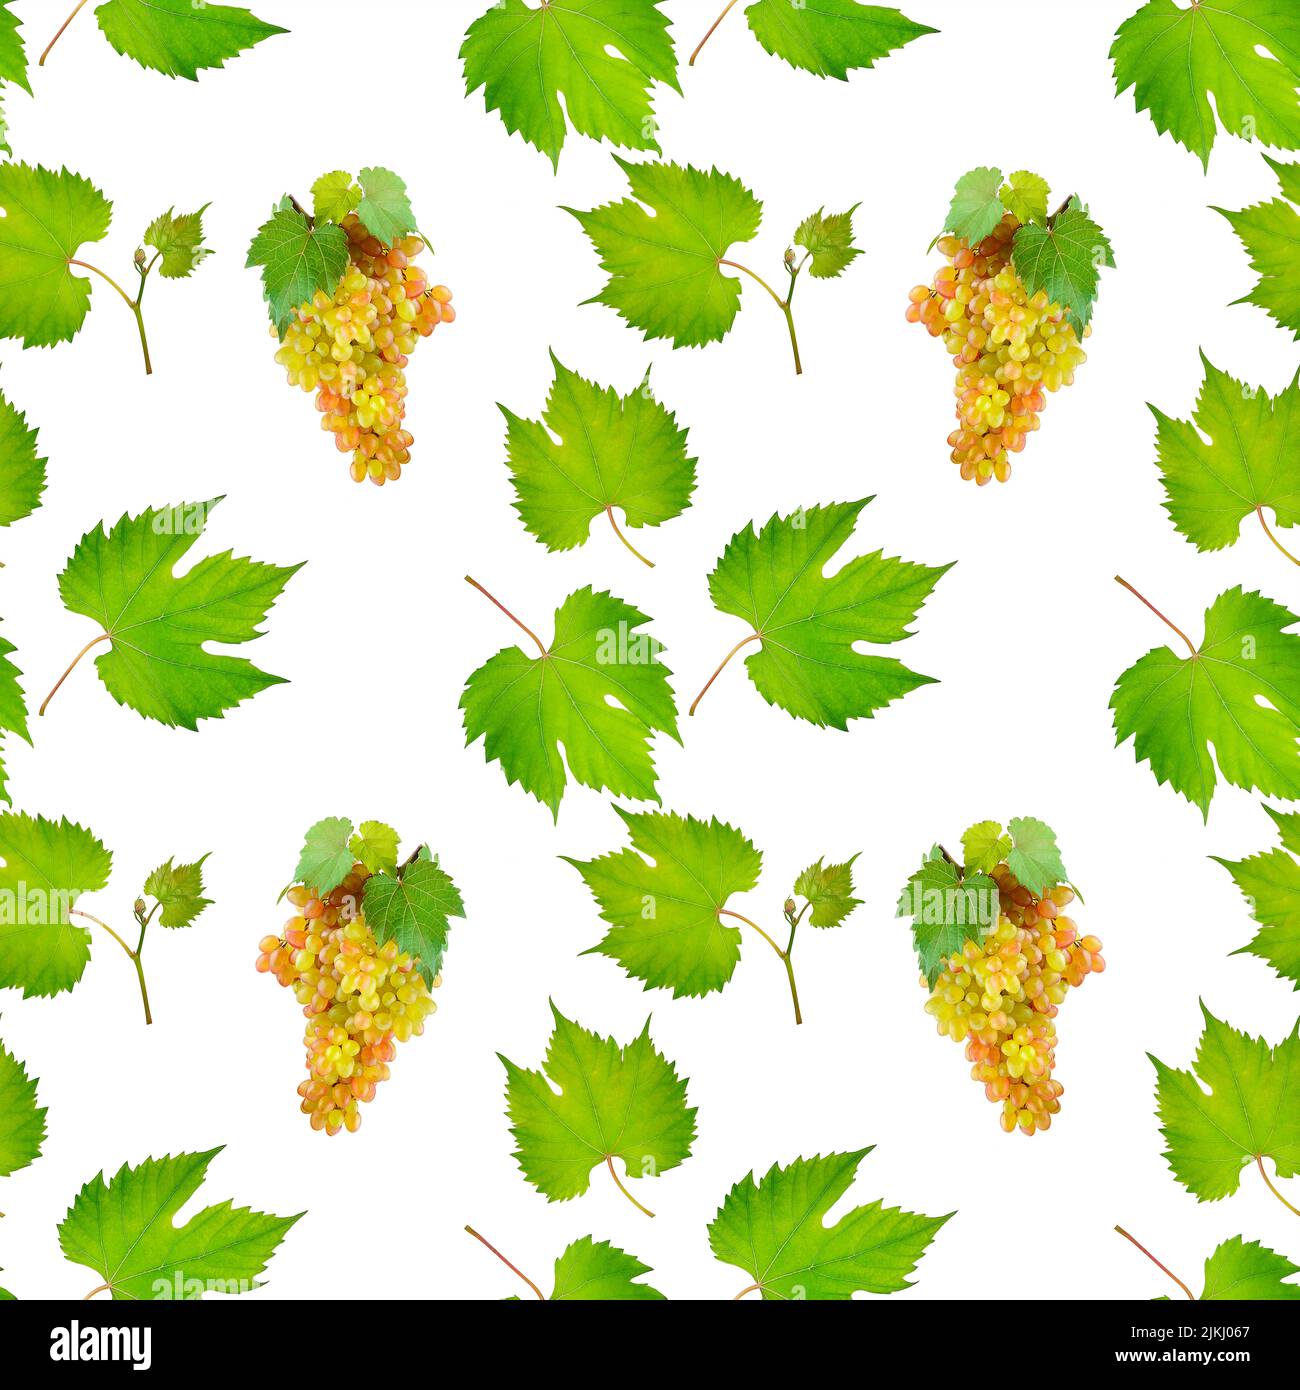 Bunches grapes and leaves isolated on white background. Seamless repeating pattern fruits. Stock Photo